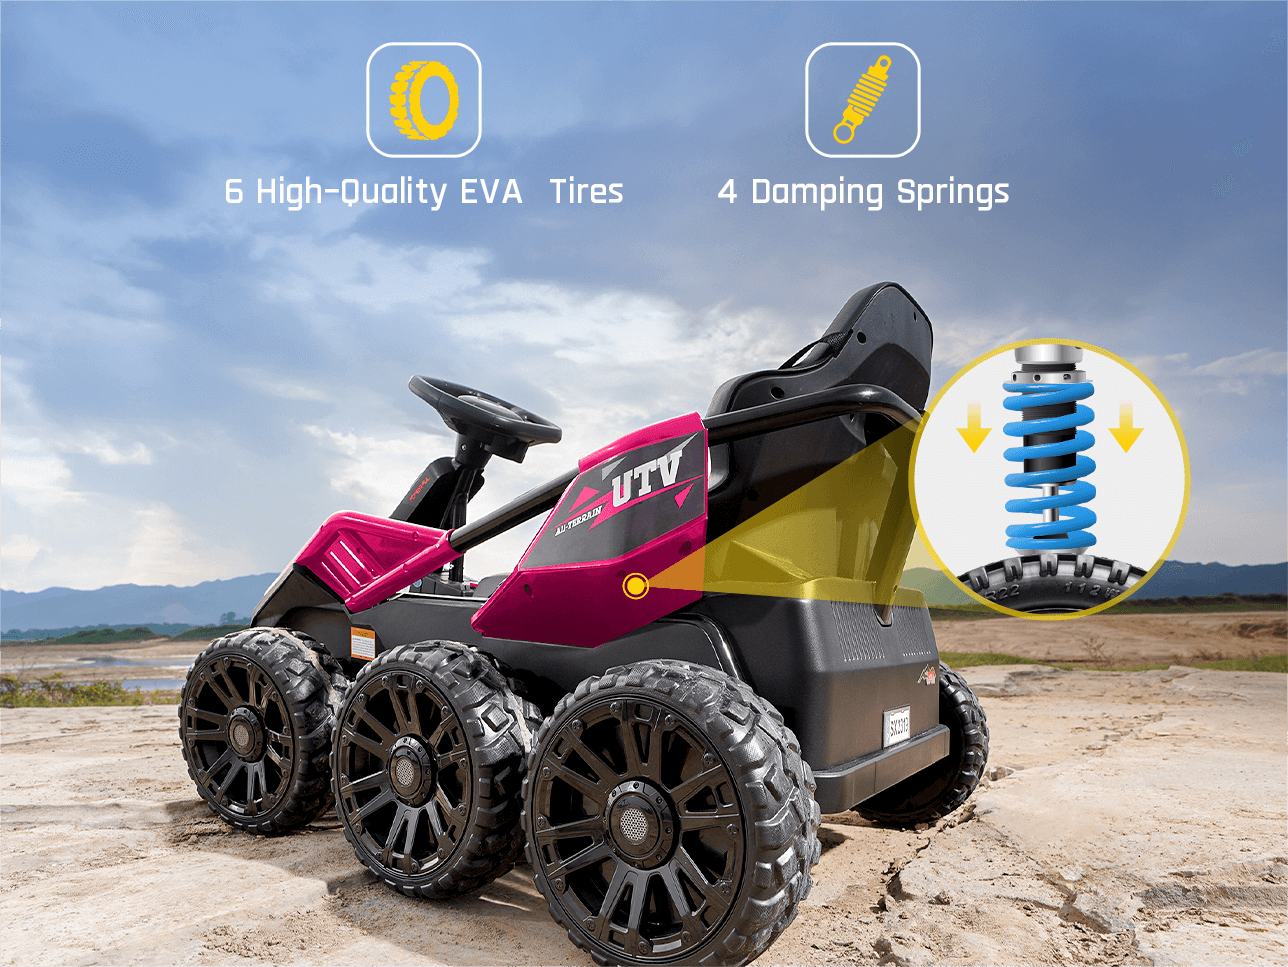 24V Ride on Toys for Big Kids, 6 Eva Wheels UTV, 4x75W 5.9MPH Powerful Electric Car, 4WD/2WD Switch, Parent Remote, 4 Shock Absorbers, Ideal Gift for Kids Ages 3+, MER-X Pro